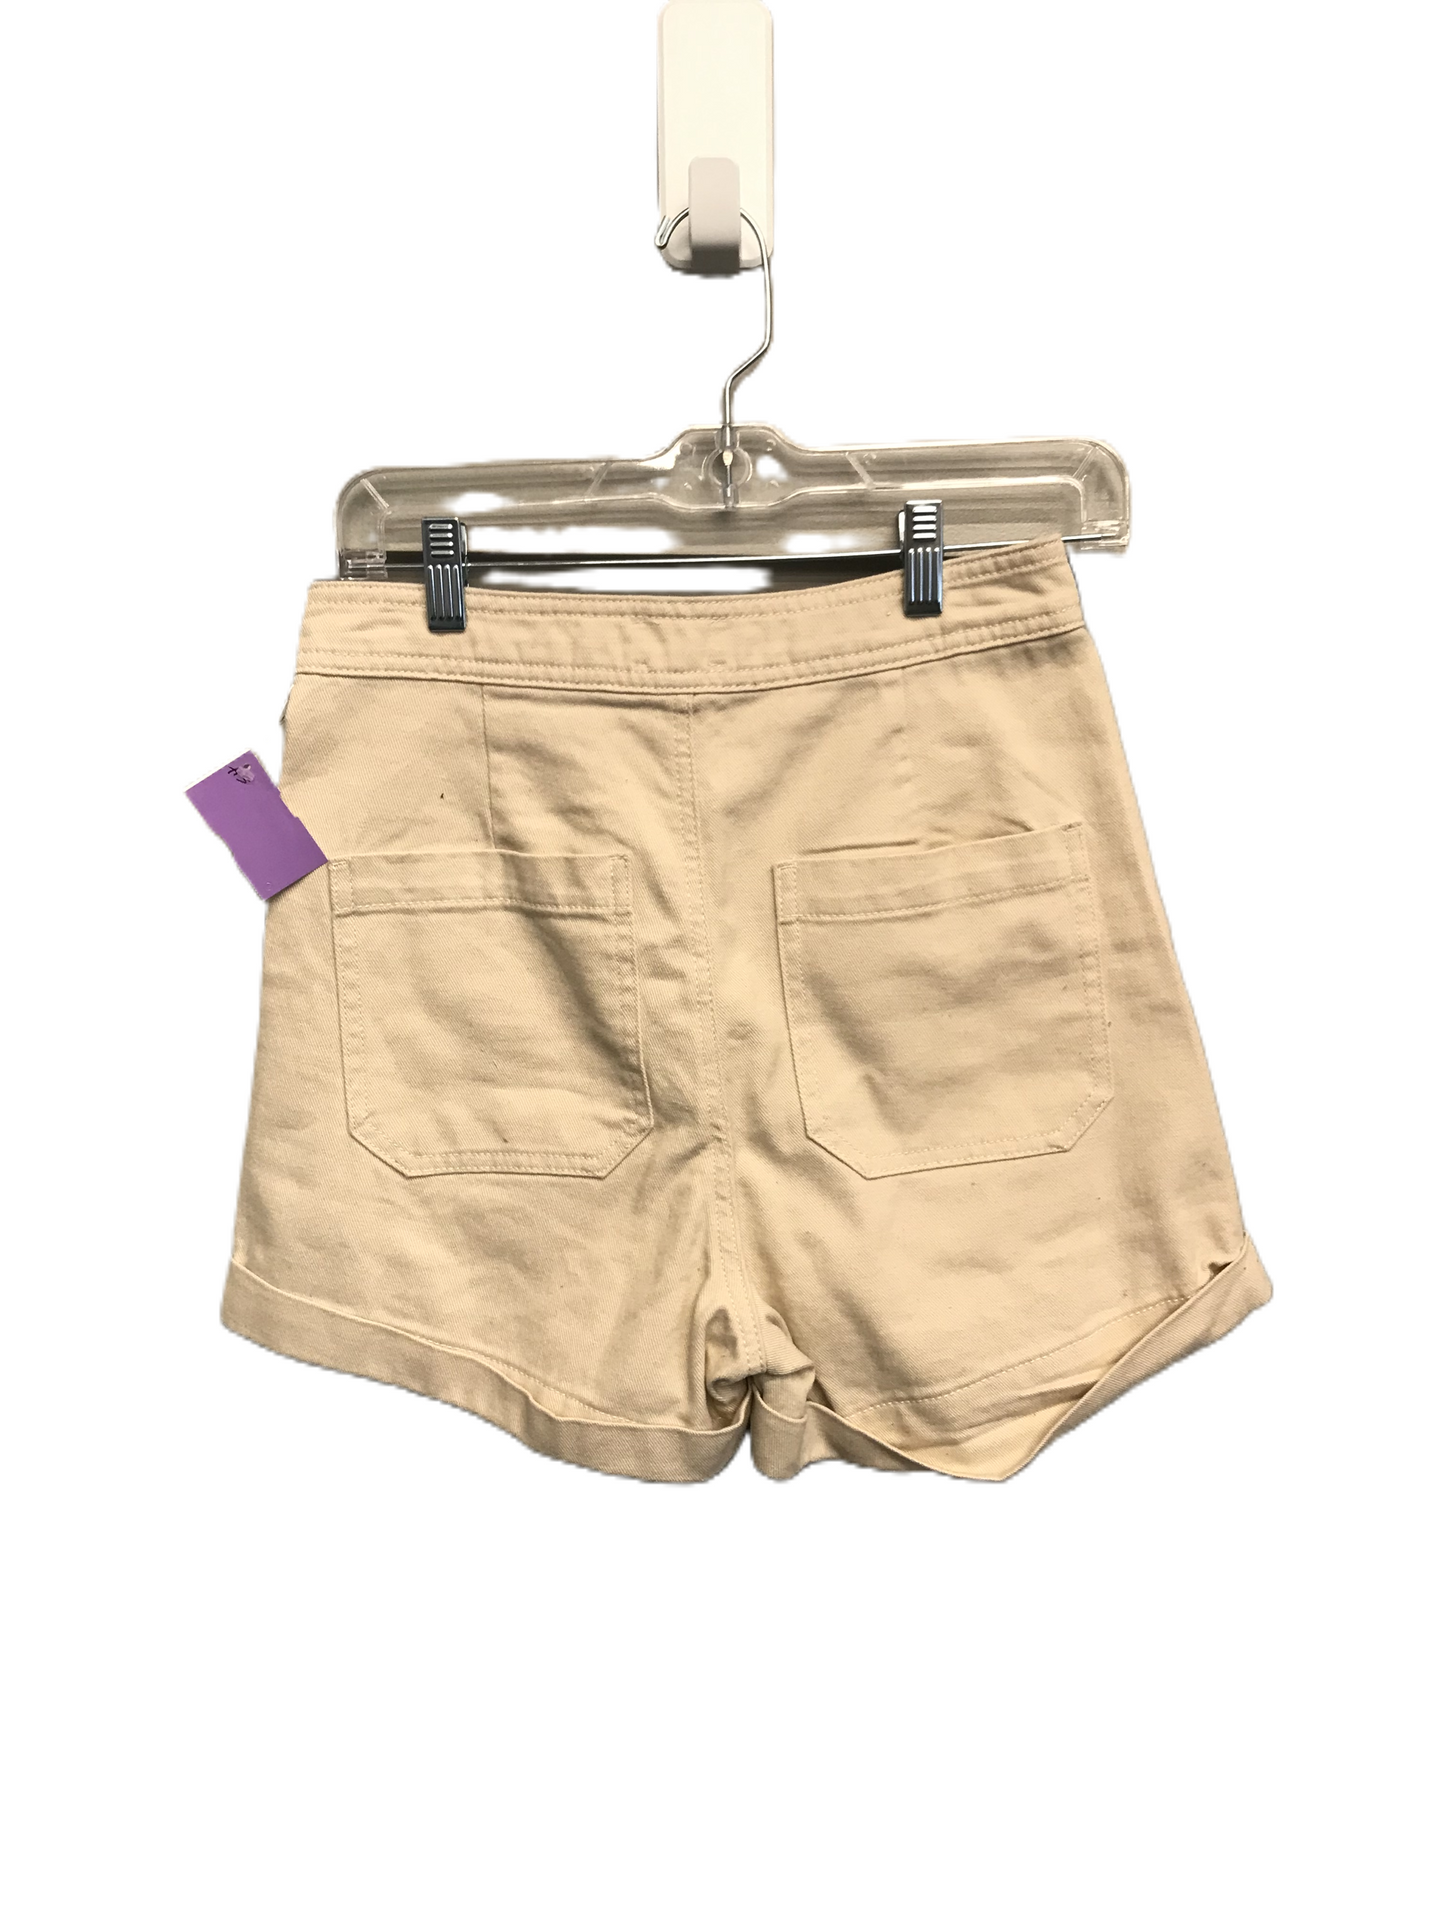 Ivory Shorts By Every Size: 4